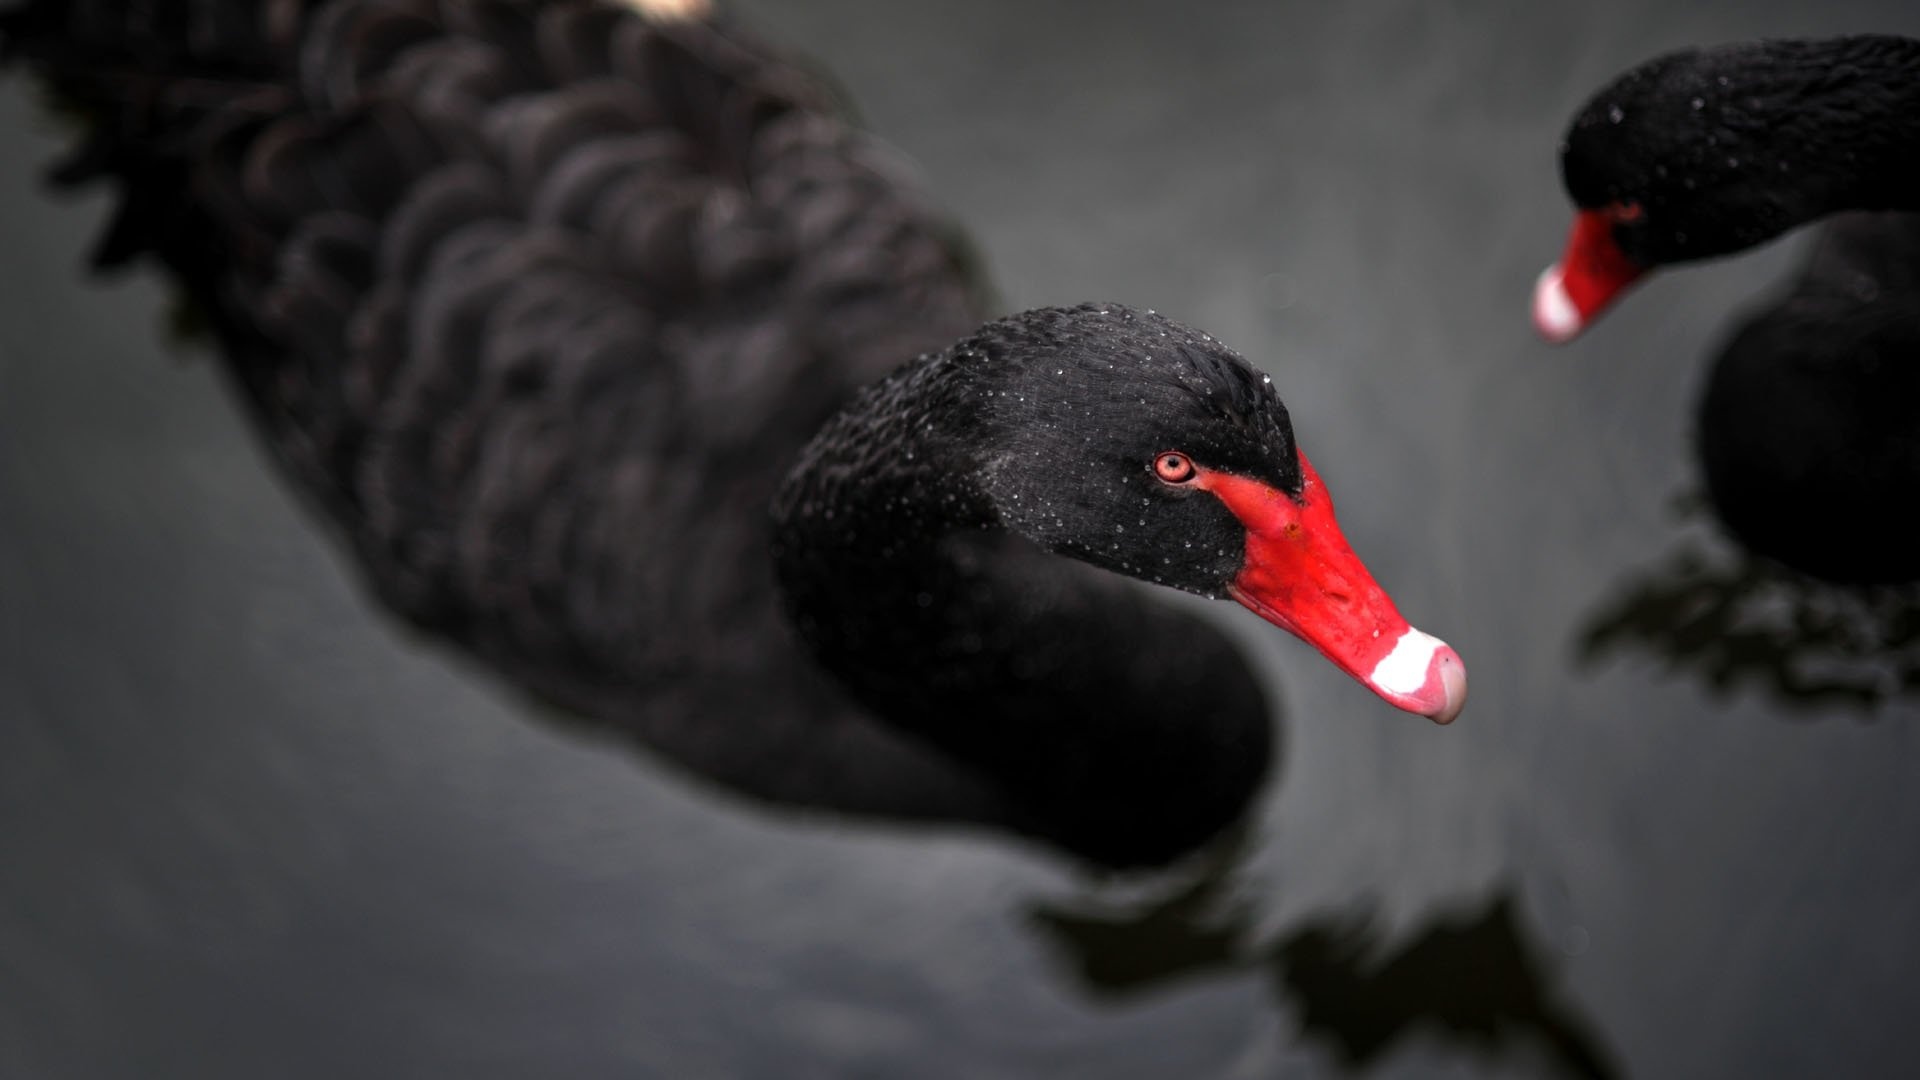 Black Swan (Bird): A large bird with mostly black plumage and a red bill. 1920x1080 Full HD Background.